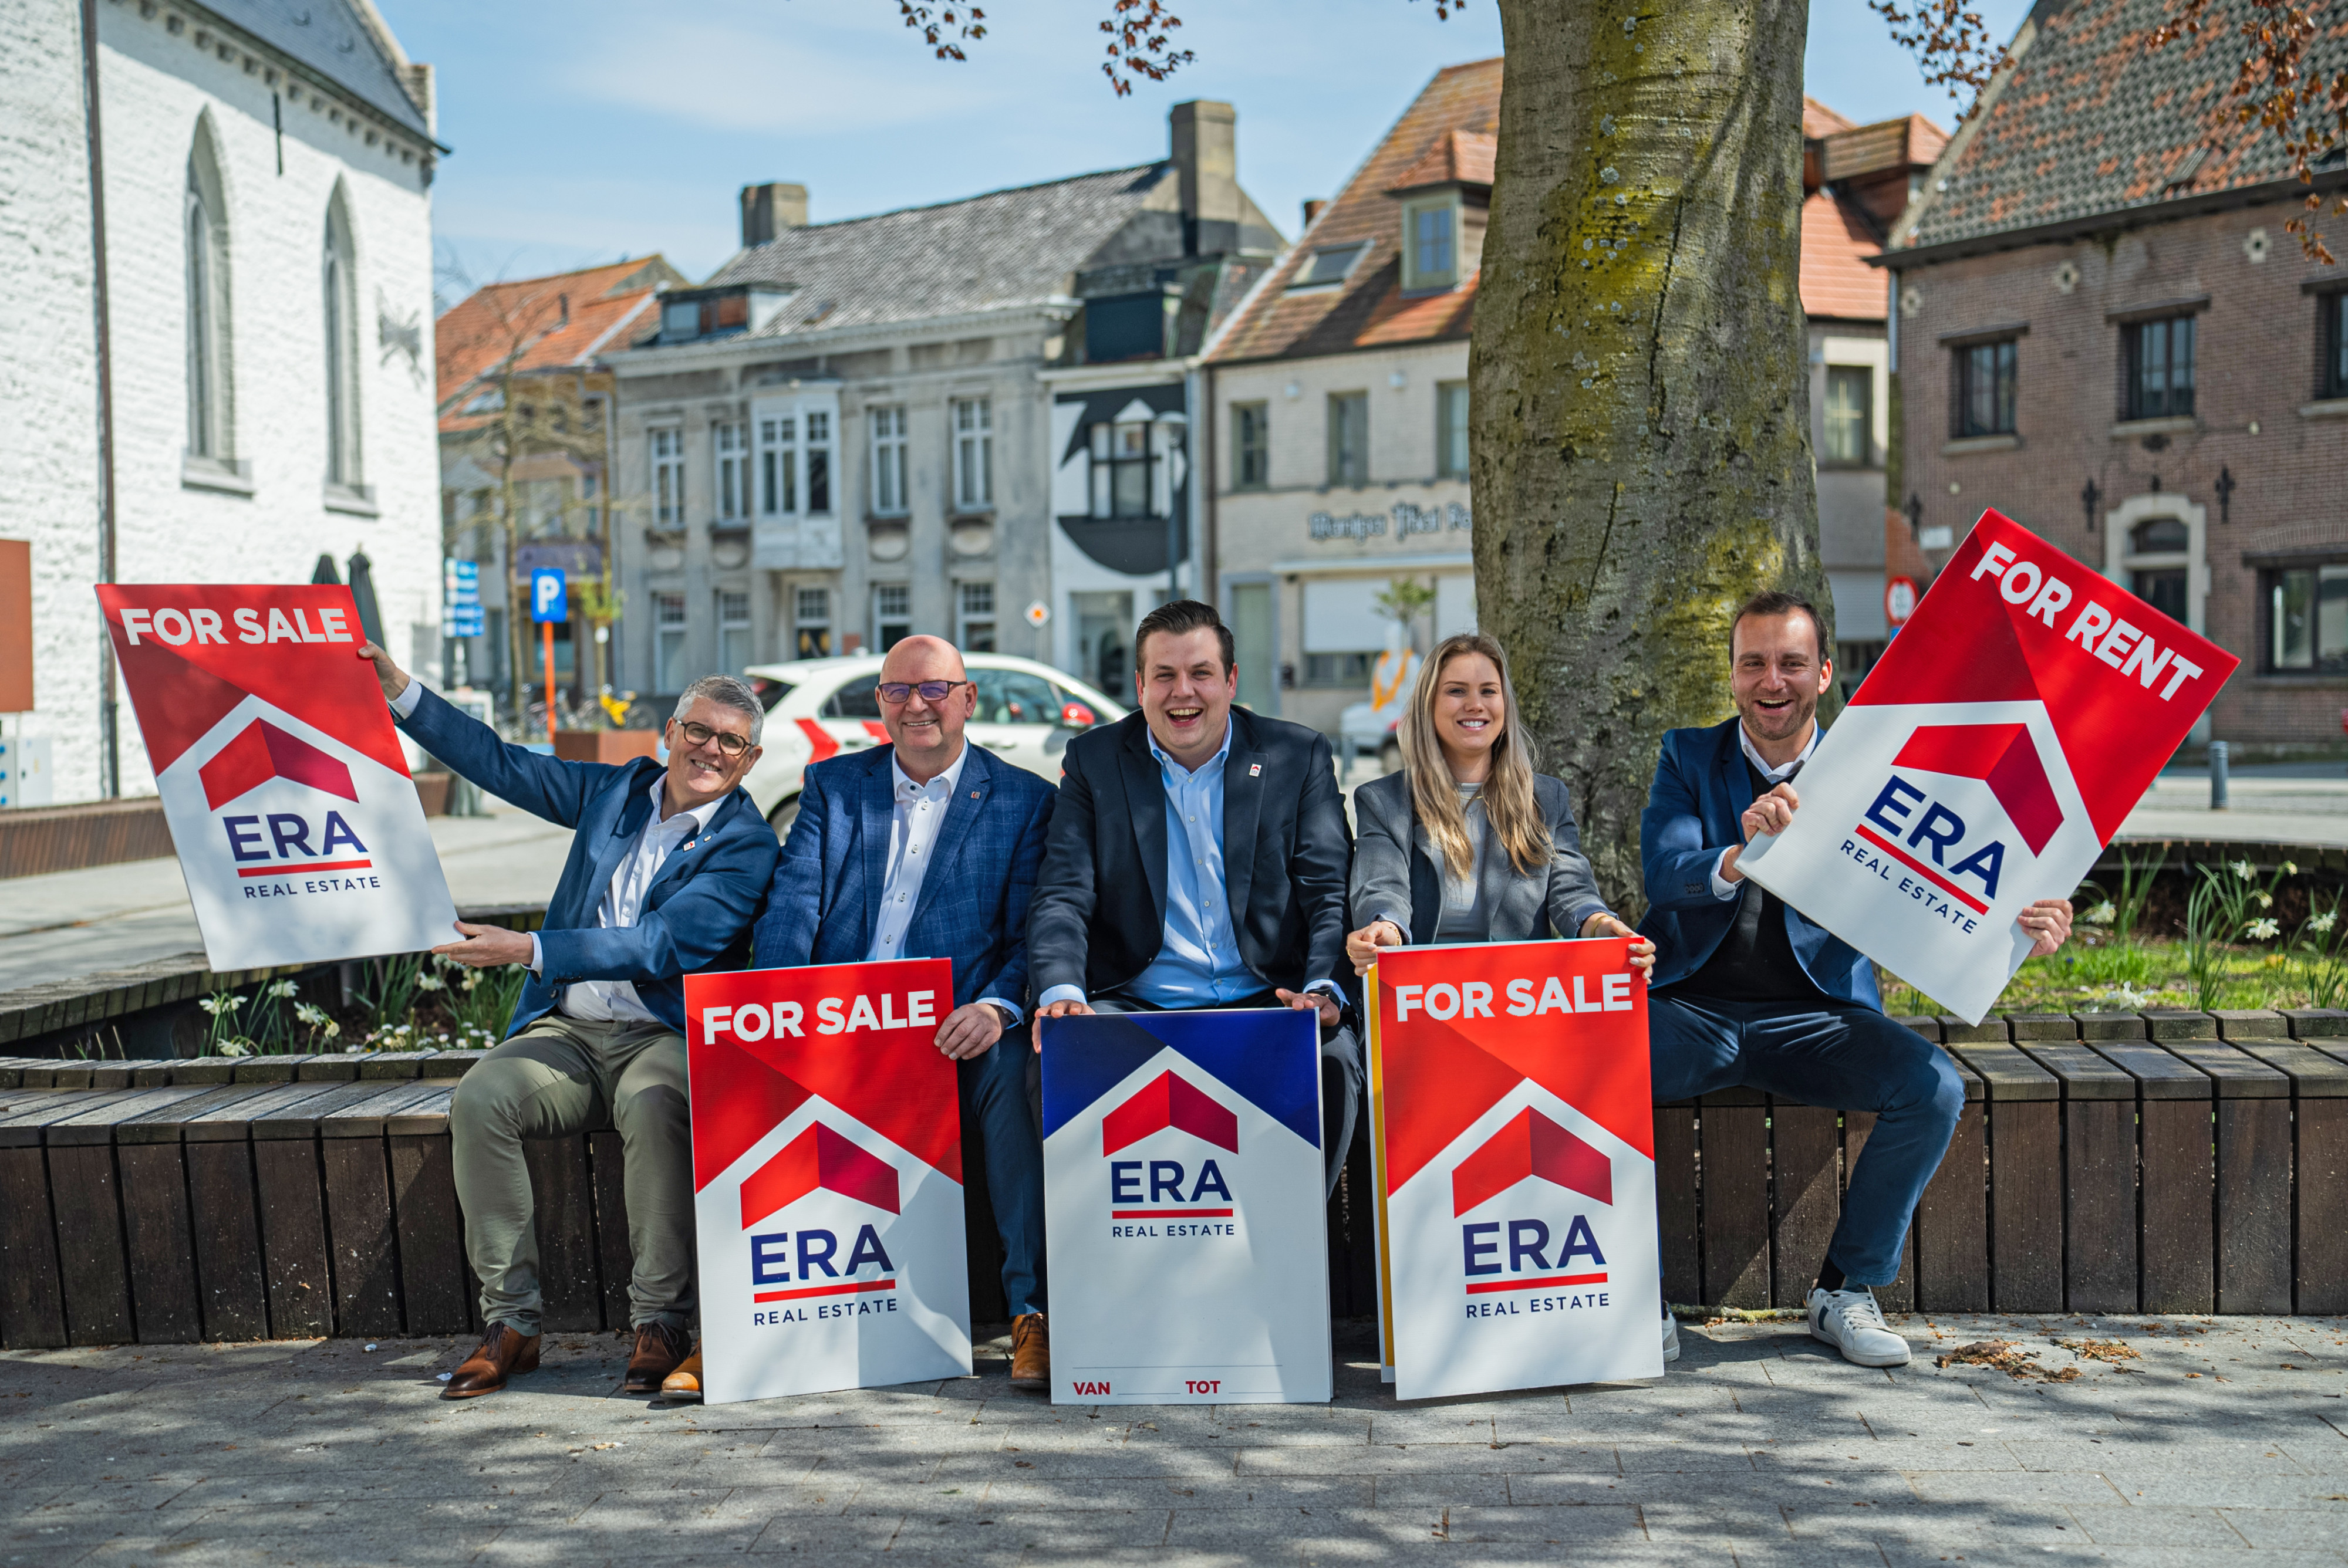 ERA estate agents with signs